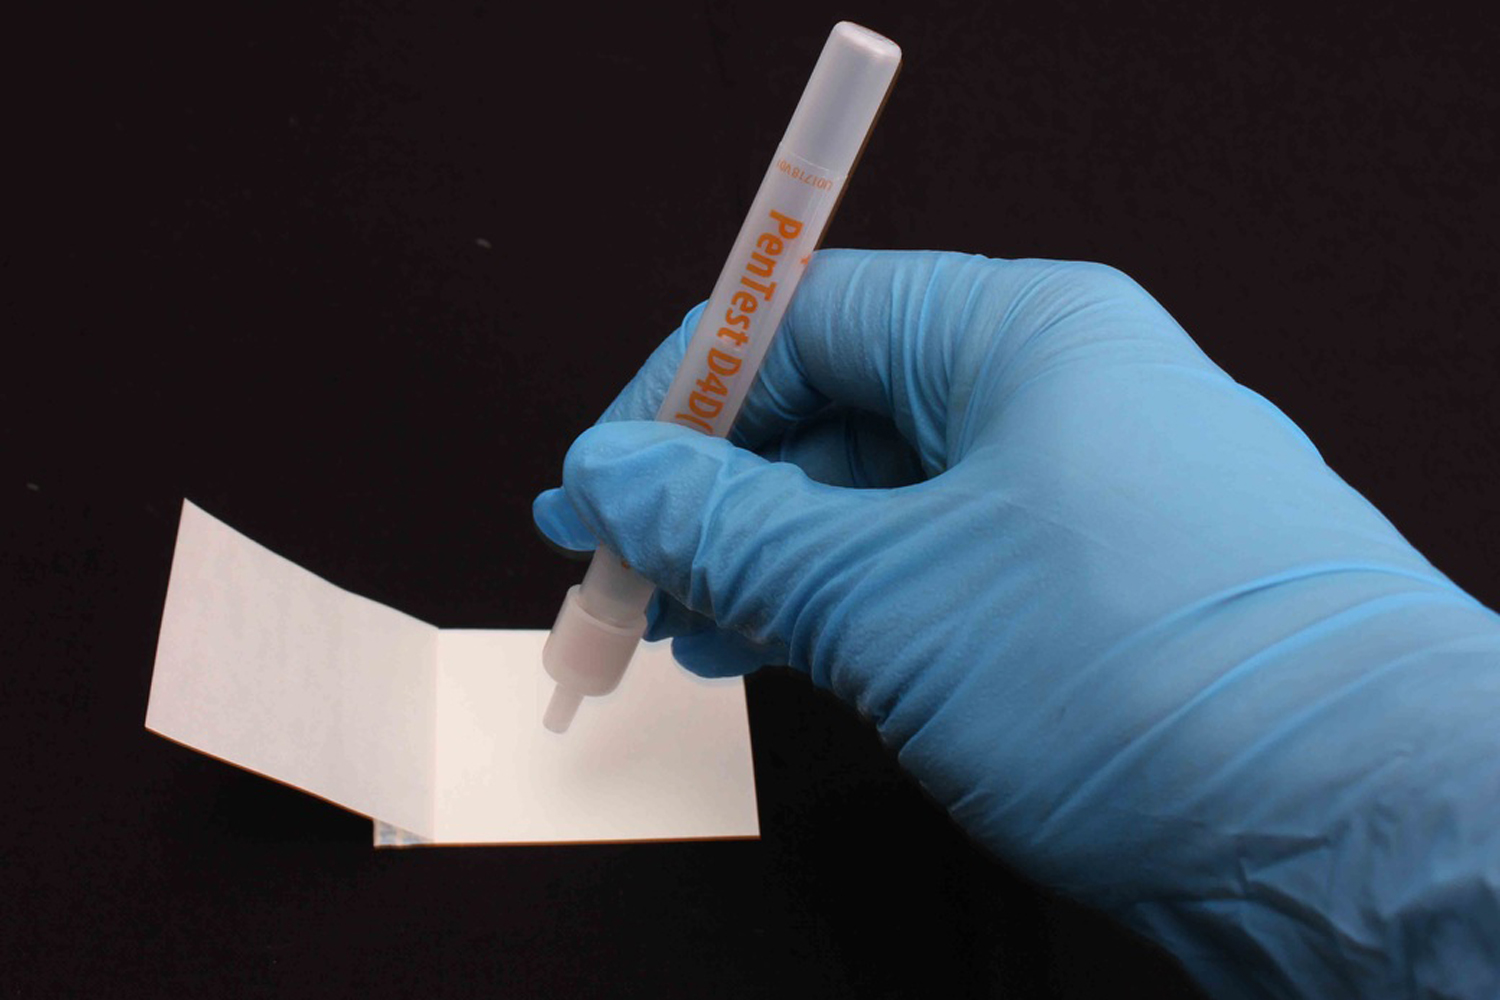 SPRING SALE: Prices slashed on meth surface test kits this month only